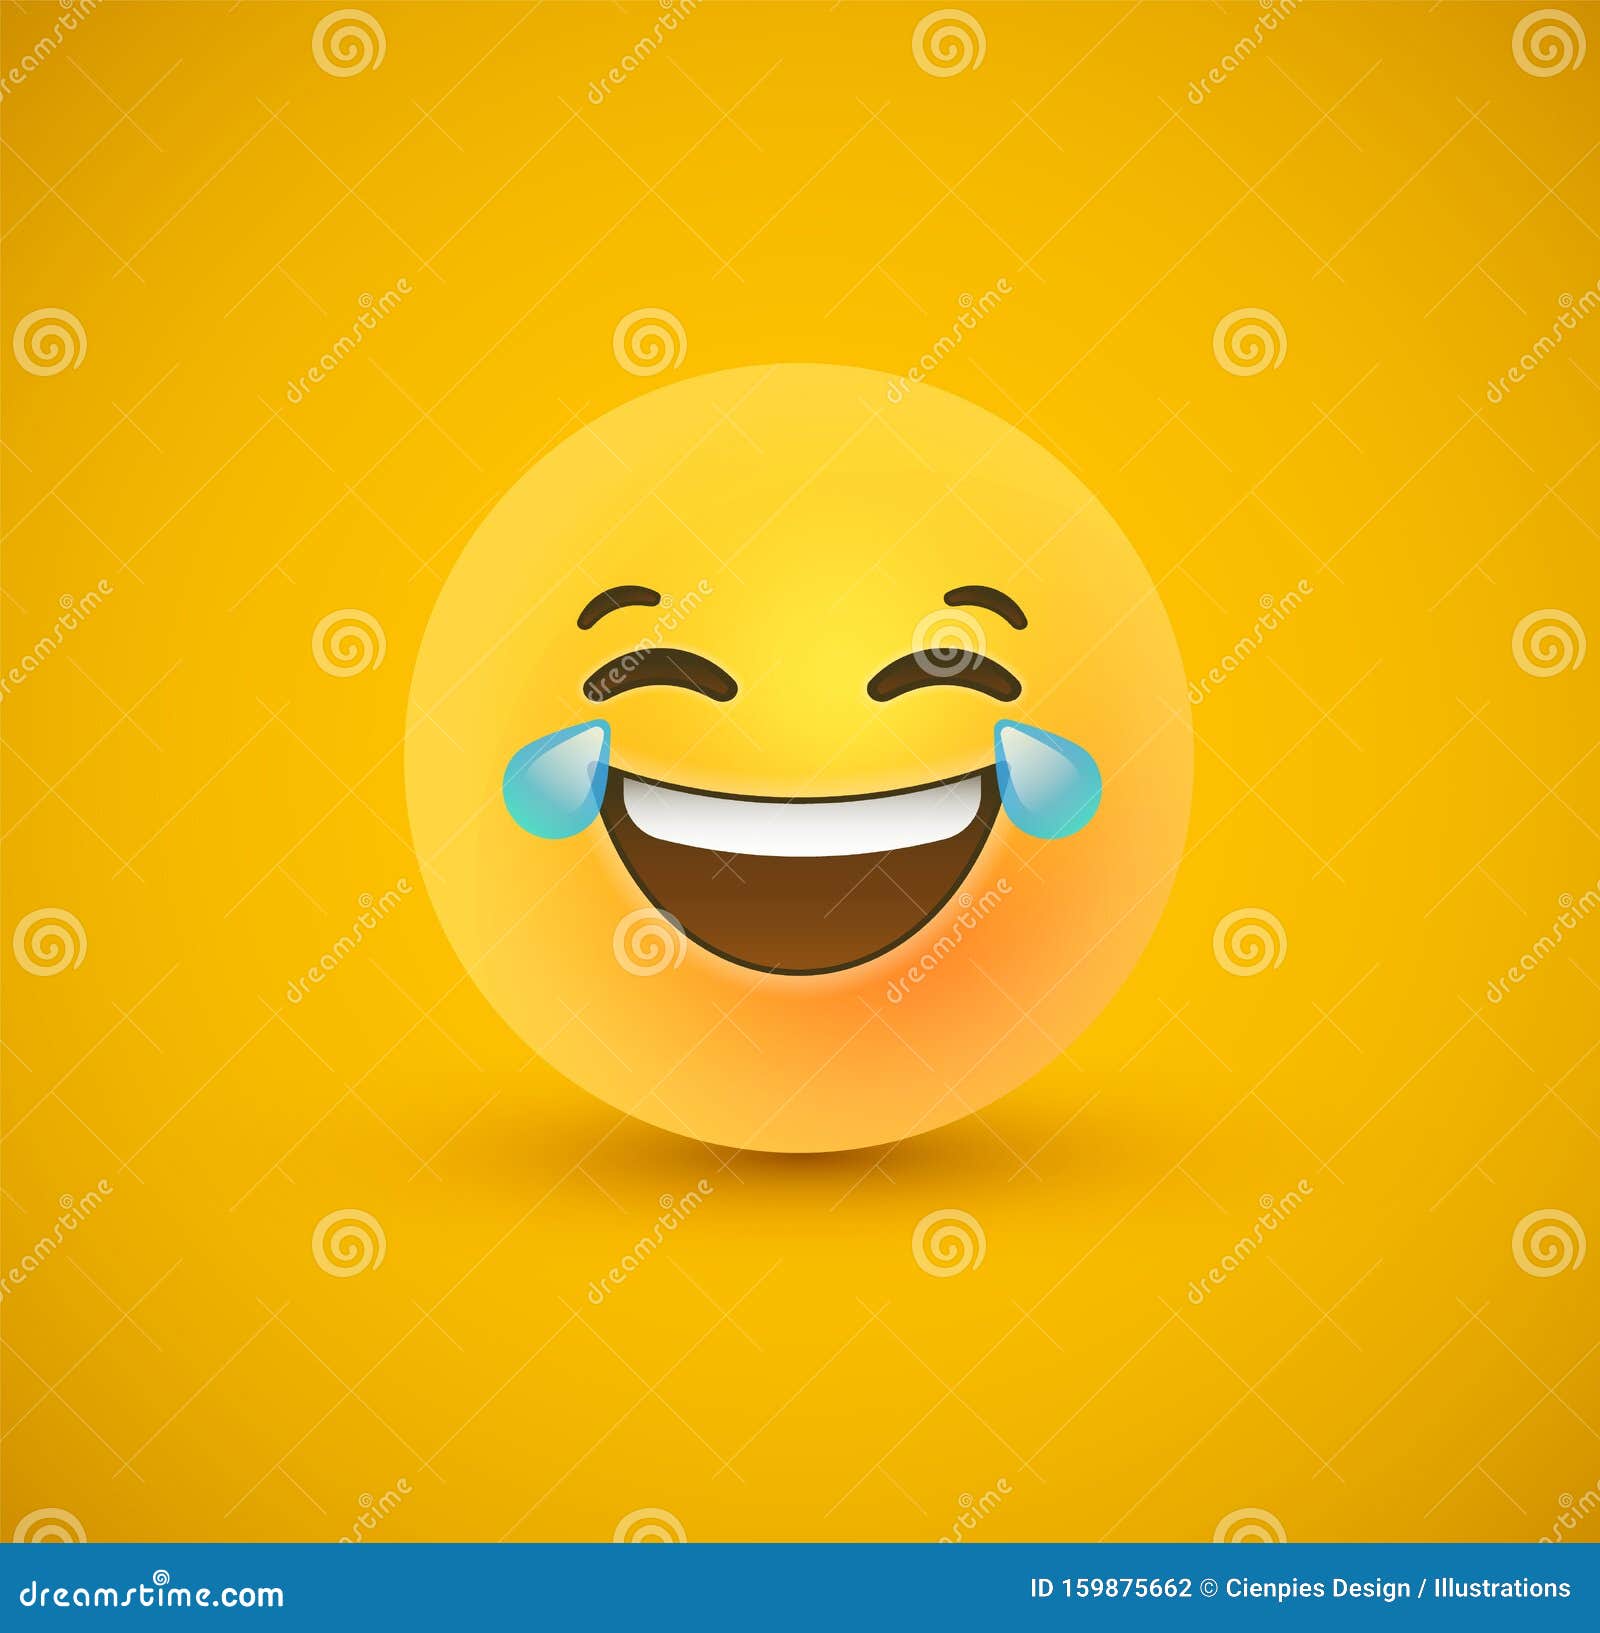 Funny Laugh Yellow Emoticon Face 3d Background Stock Vector - Illustration  of children, background: 159875662